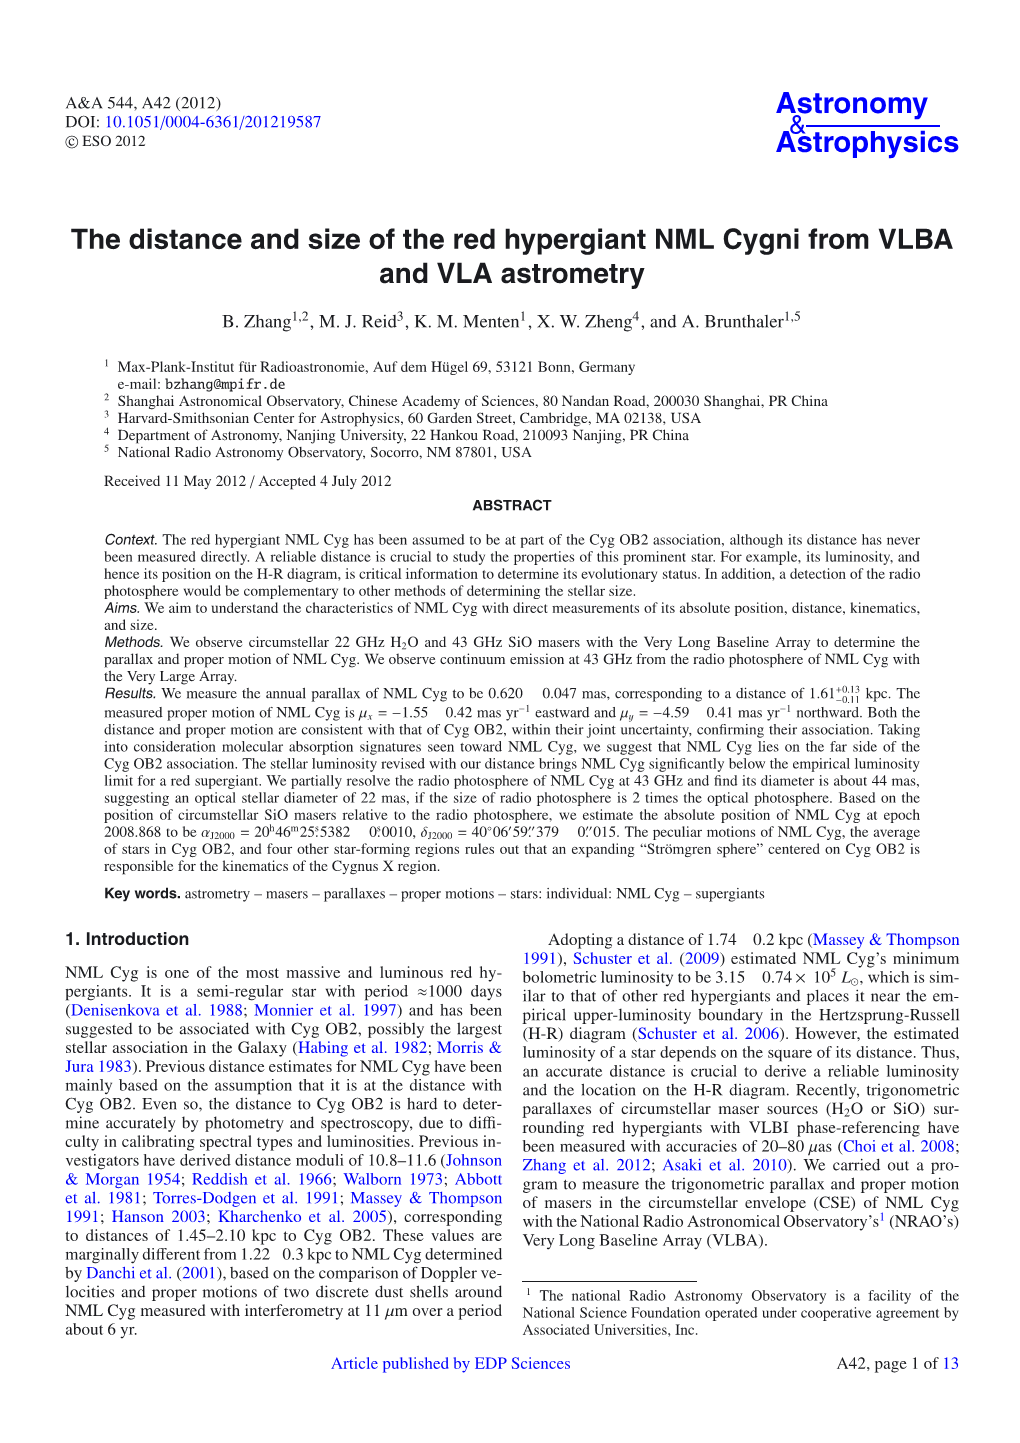 The Distance and Size of the Red Hypergiant NML Cygni from VLBA and VLA Astrometry